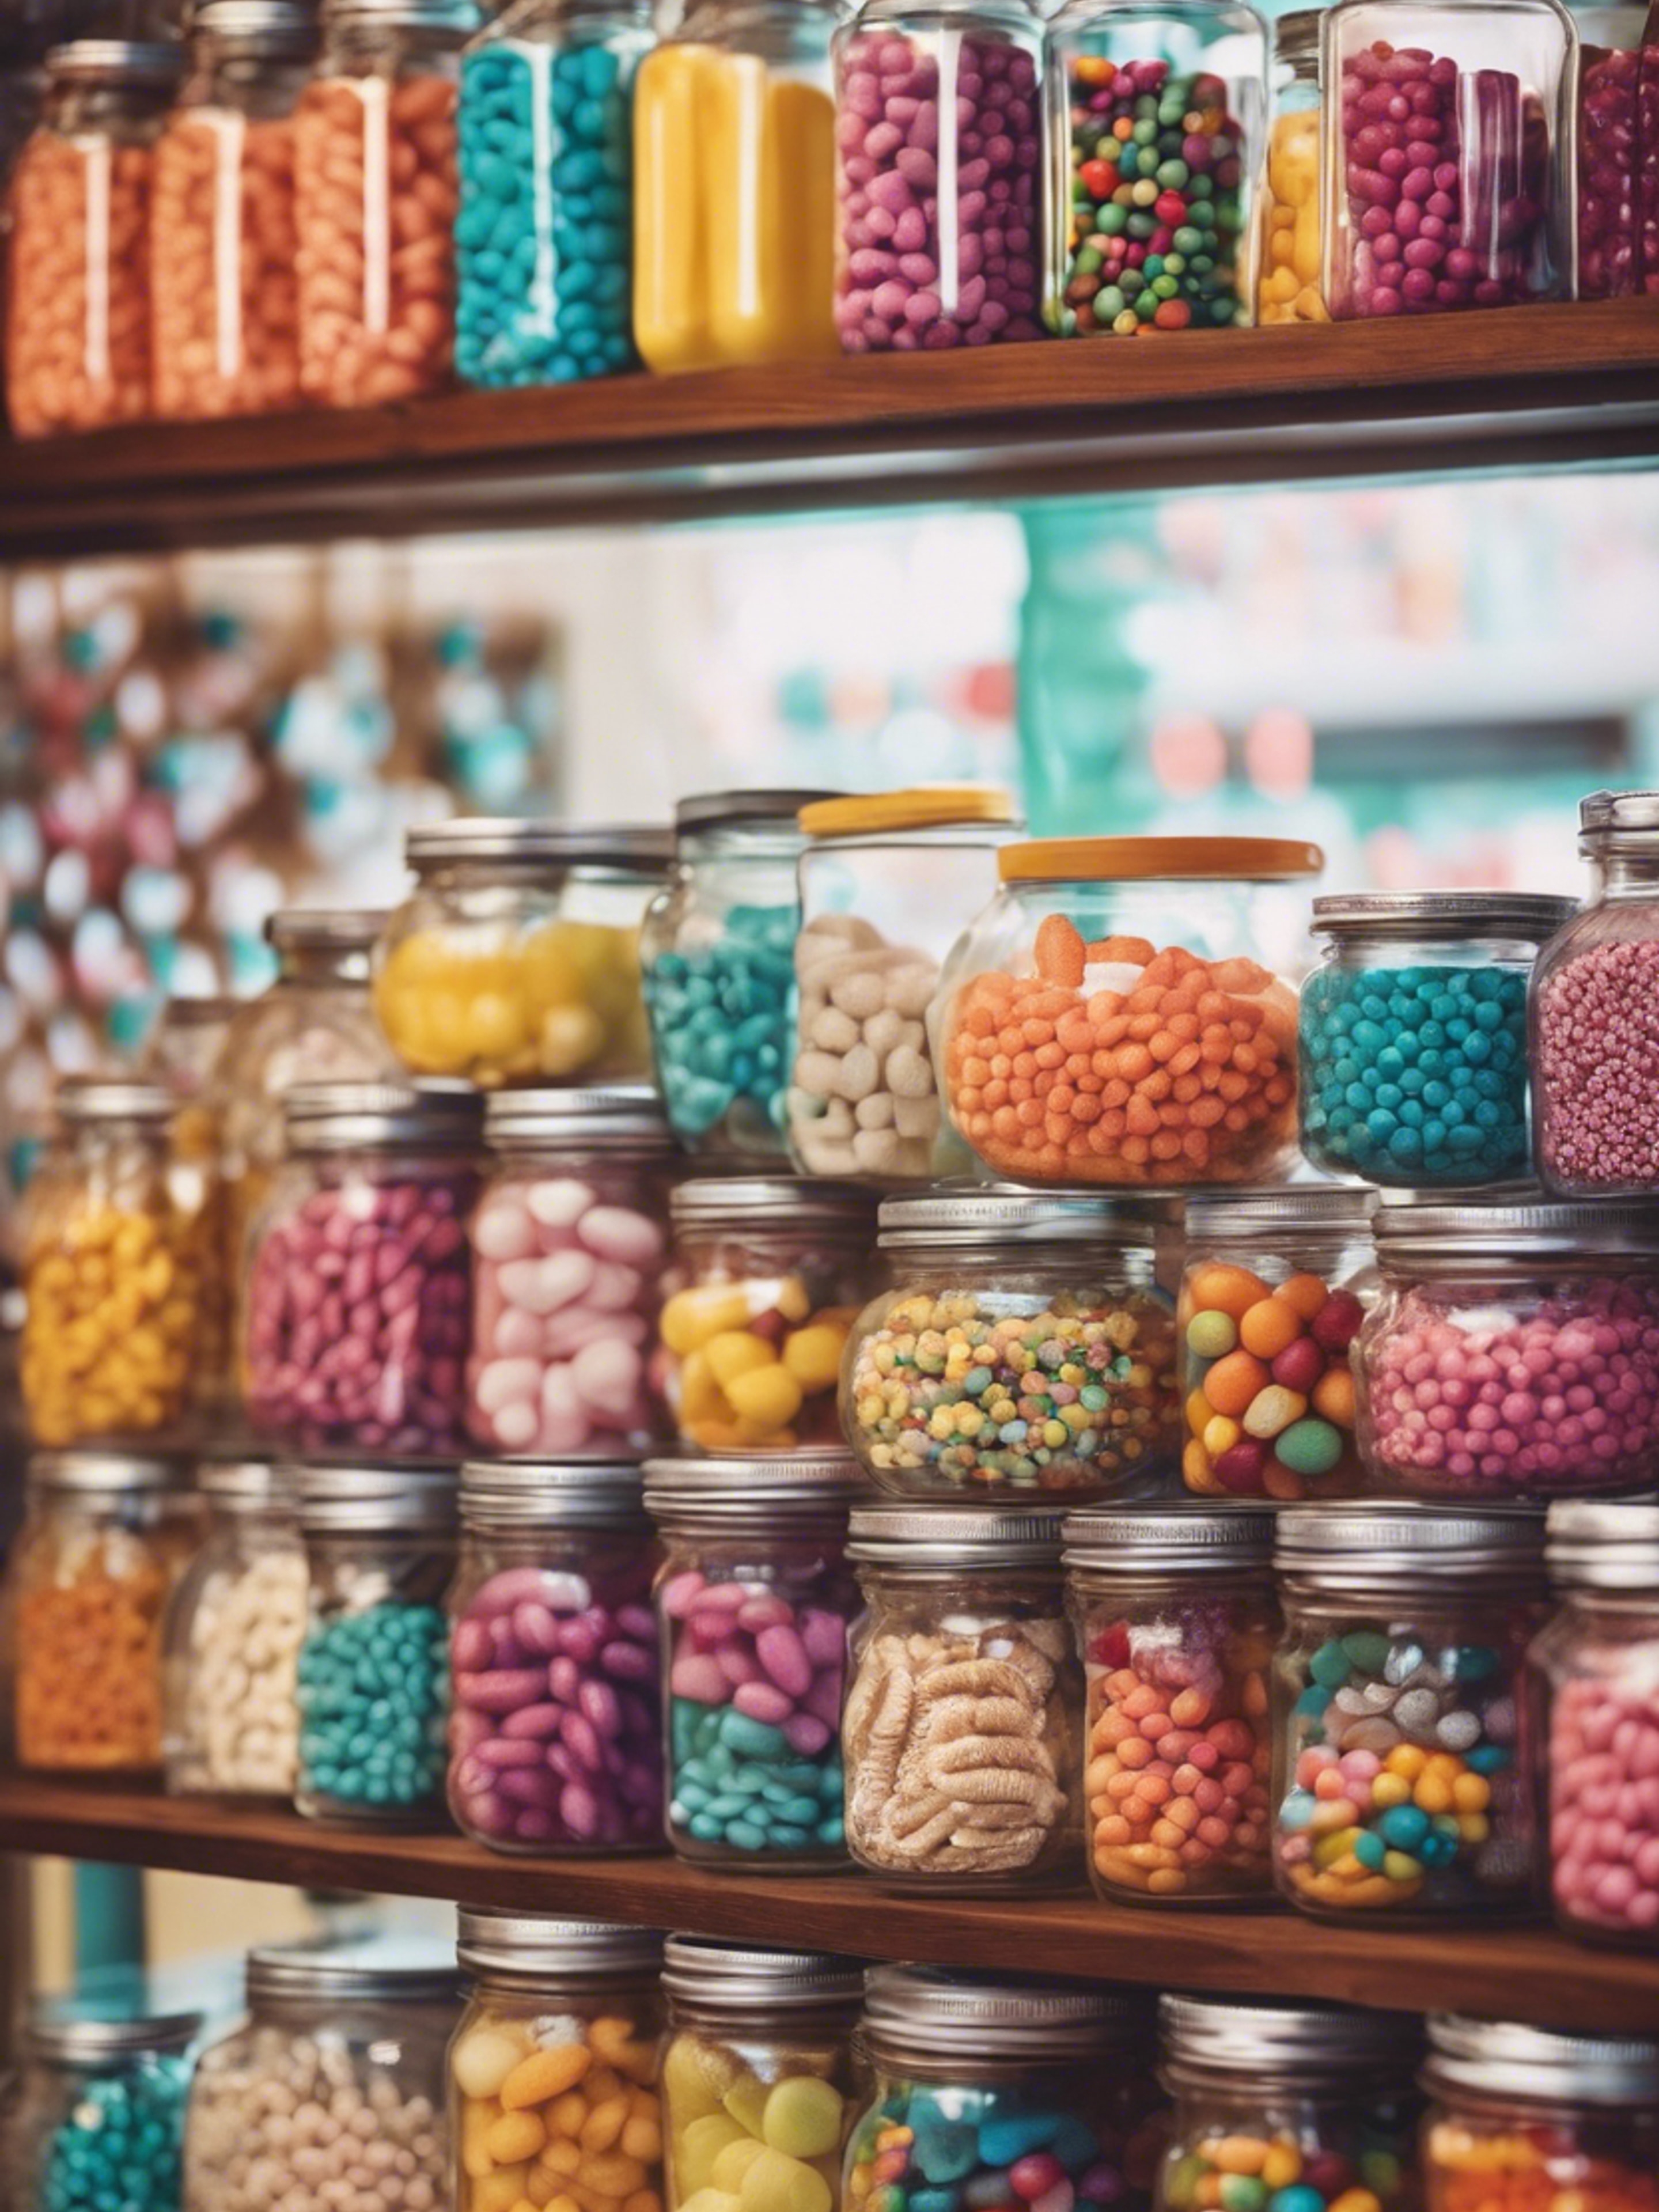 Retro candy store filled with jars of colorful treats. Kertas dinding[53bdbe1ef5c6451abca1]